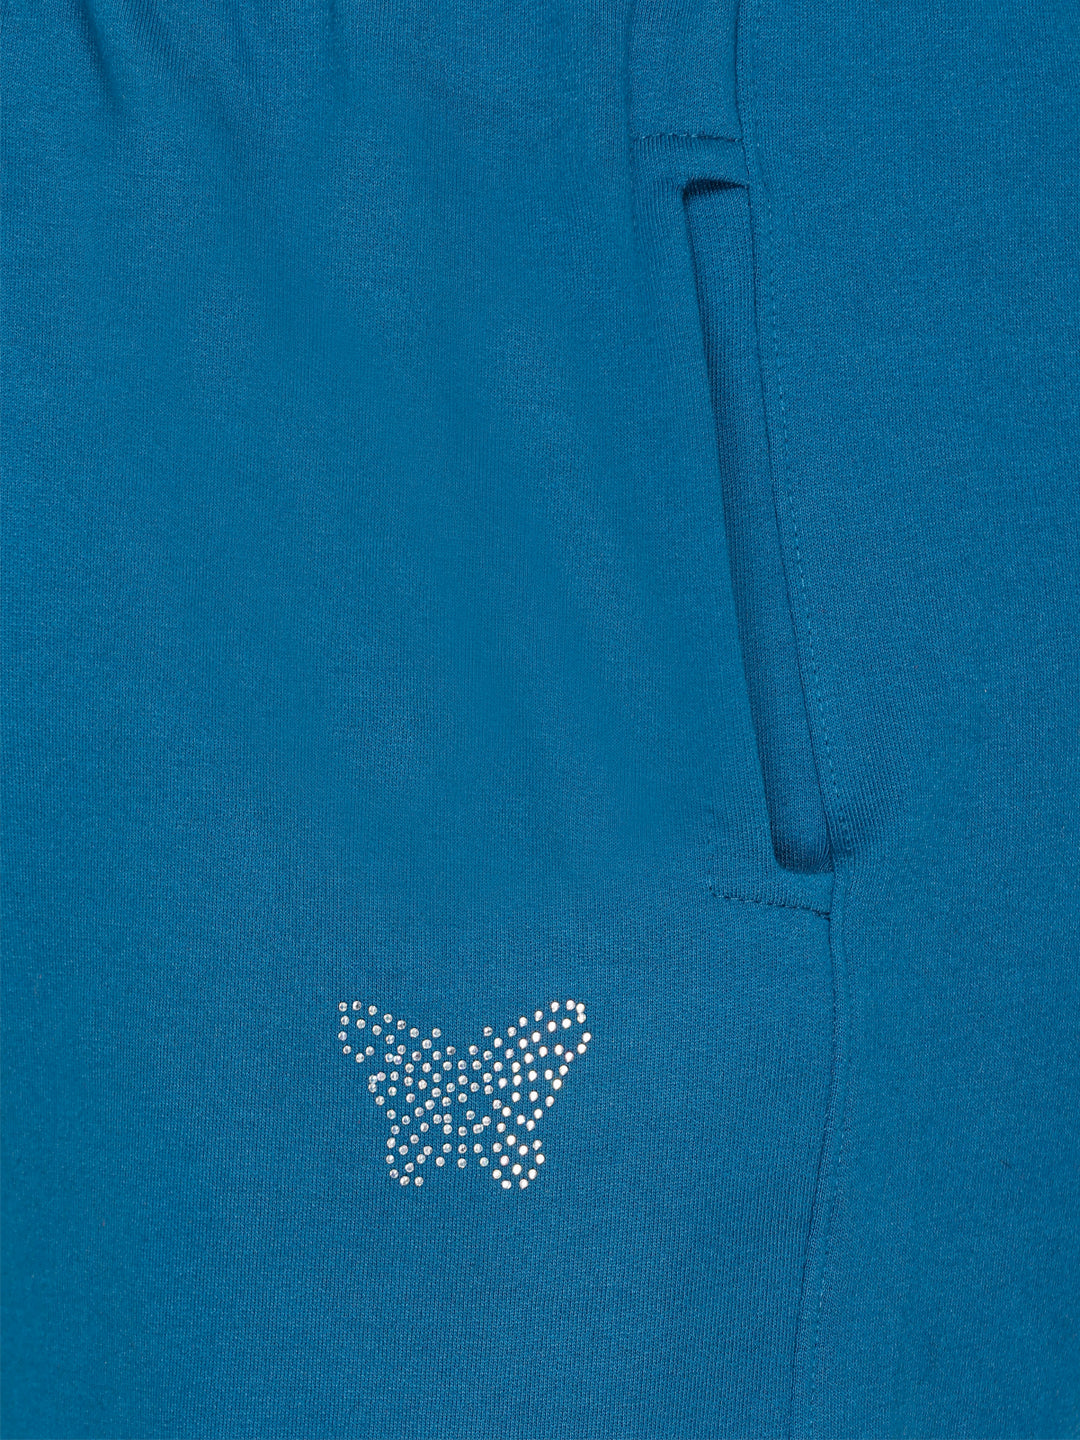 Stylish Teal Blue Winter Fleece Track Pants For Women Online In India